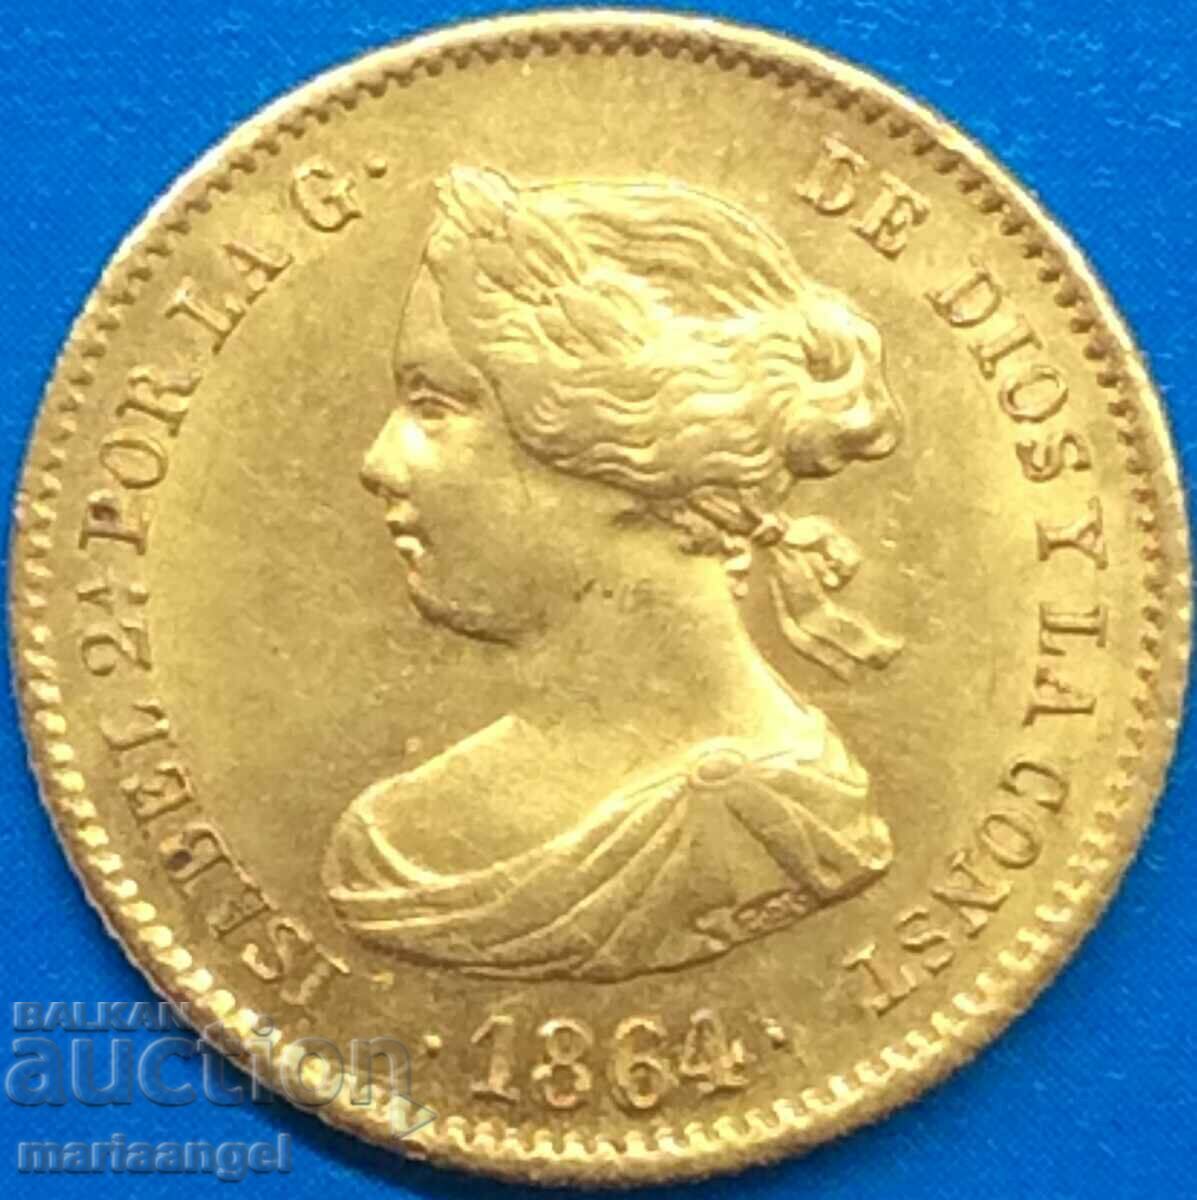 40 Reales 1864 Ισπανία Gold Isabella II Μαδρίτη